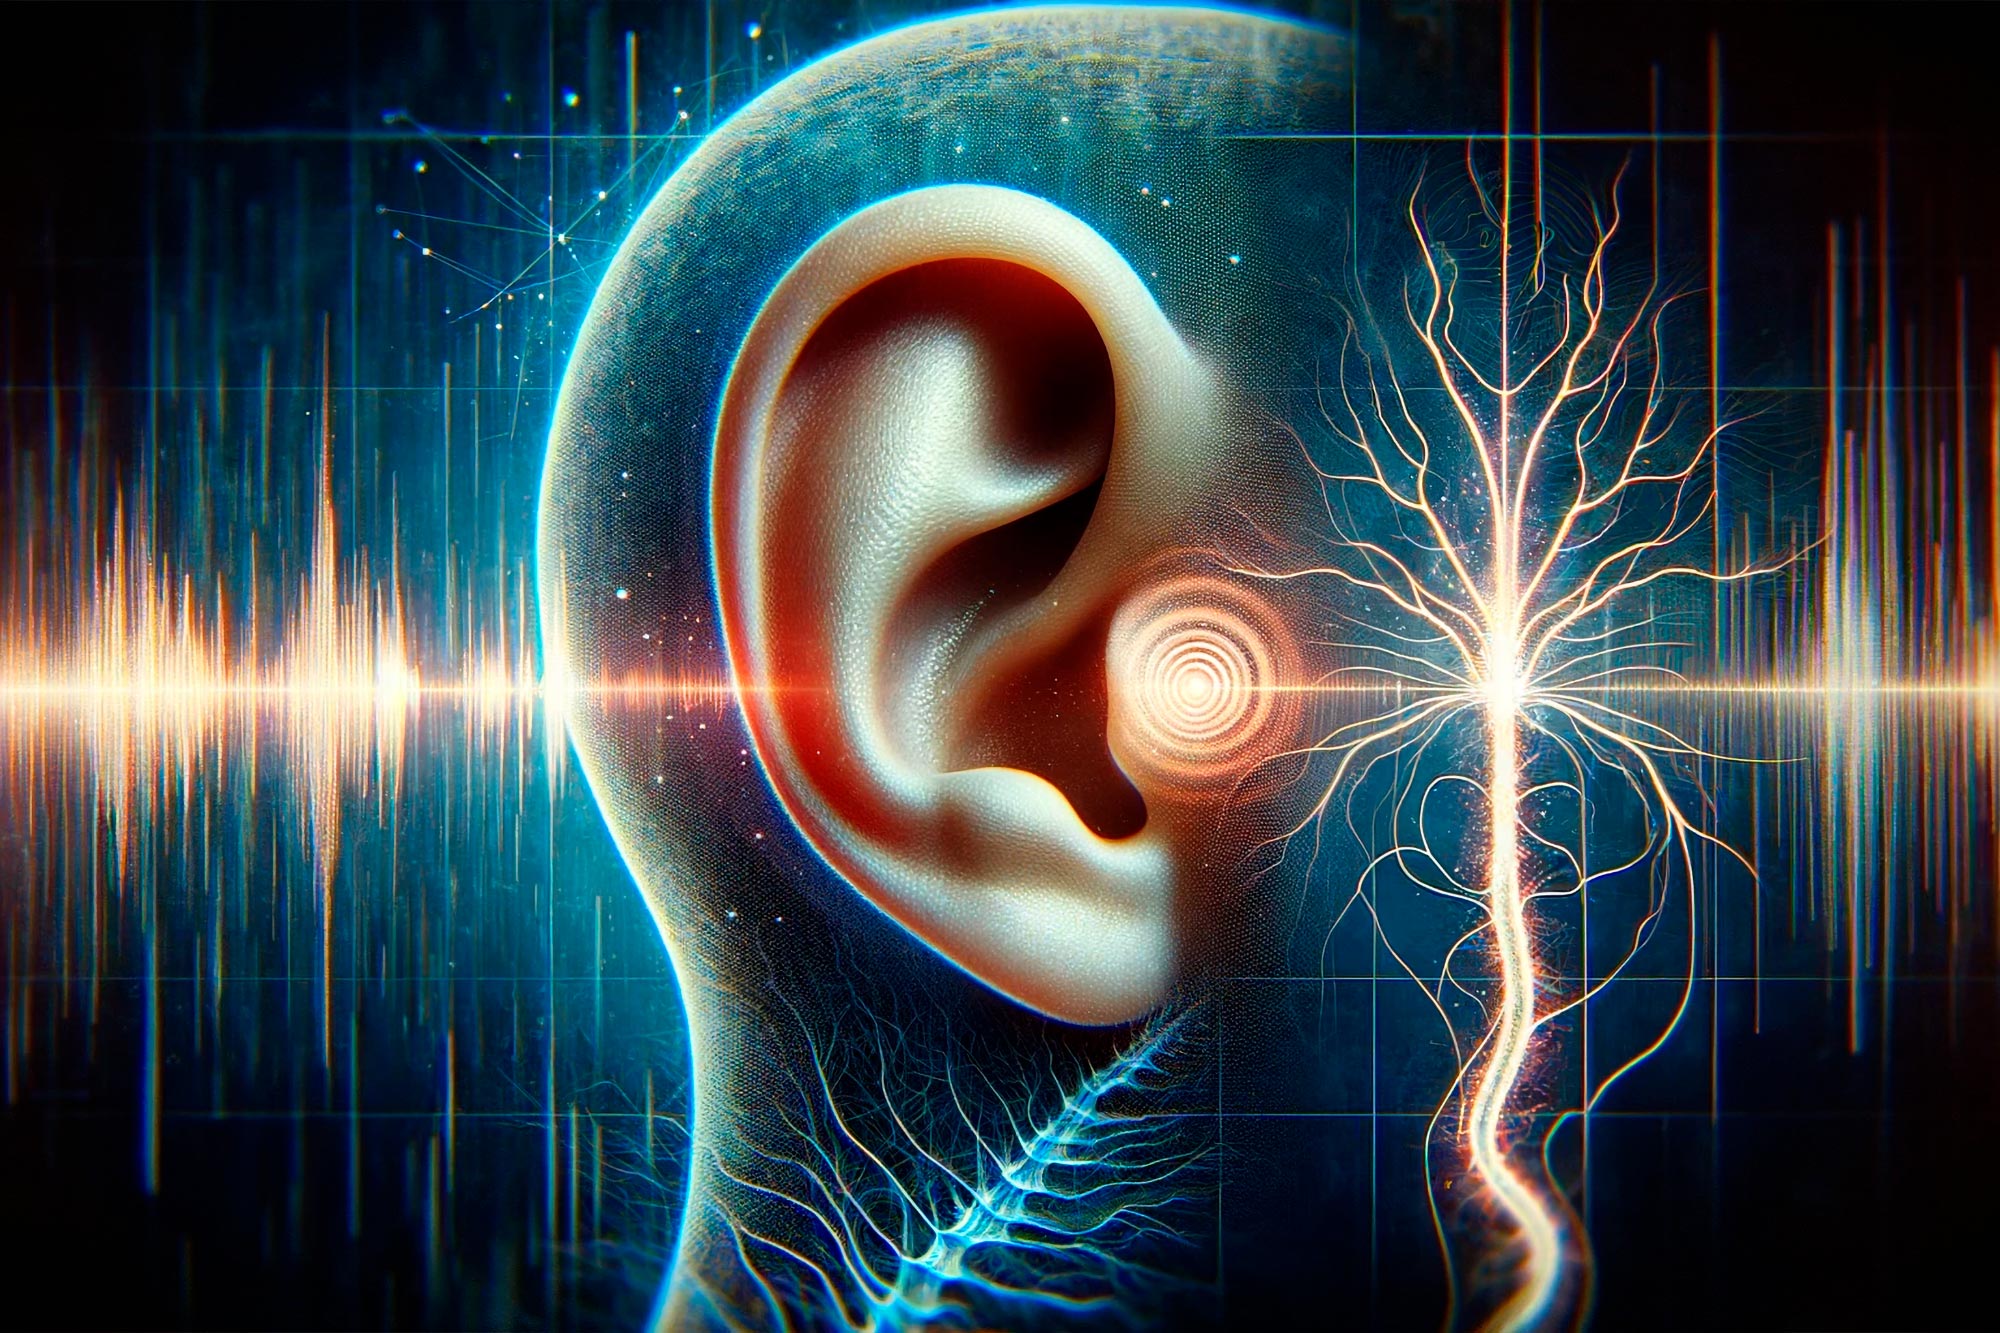 Uncovering Tinnitus: The Connection to Unrecognized Auditory Nerve Damage and Progress Towards a Treatment